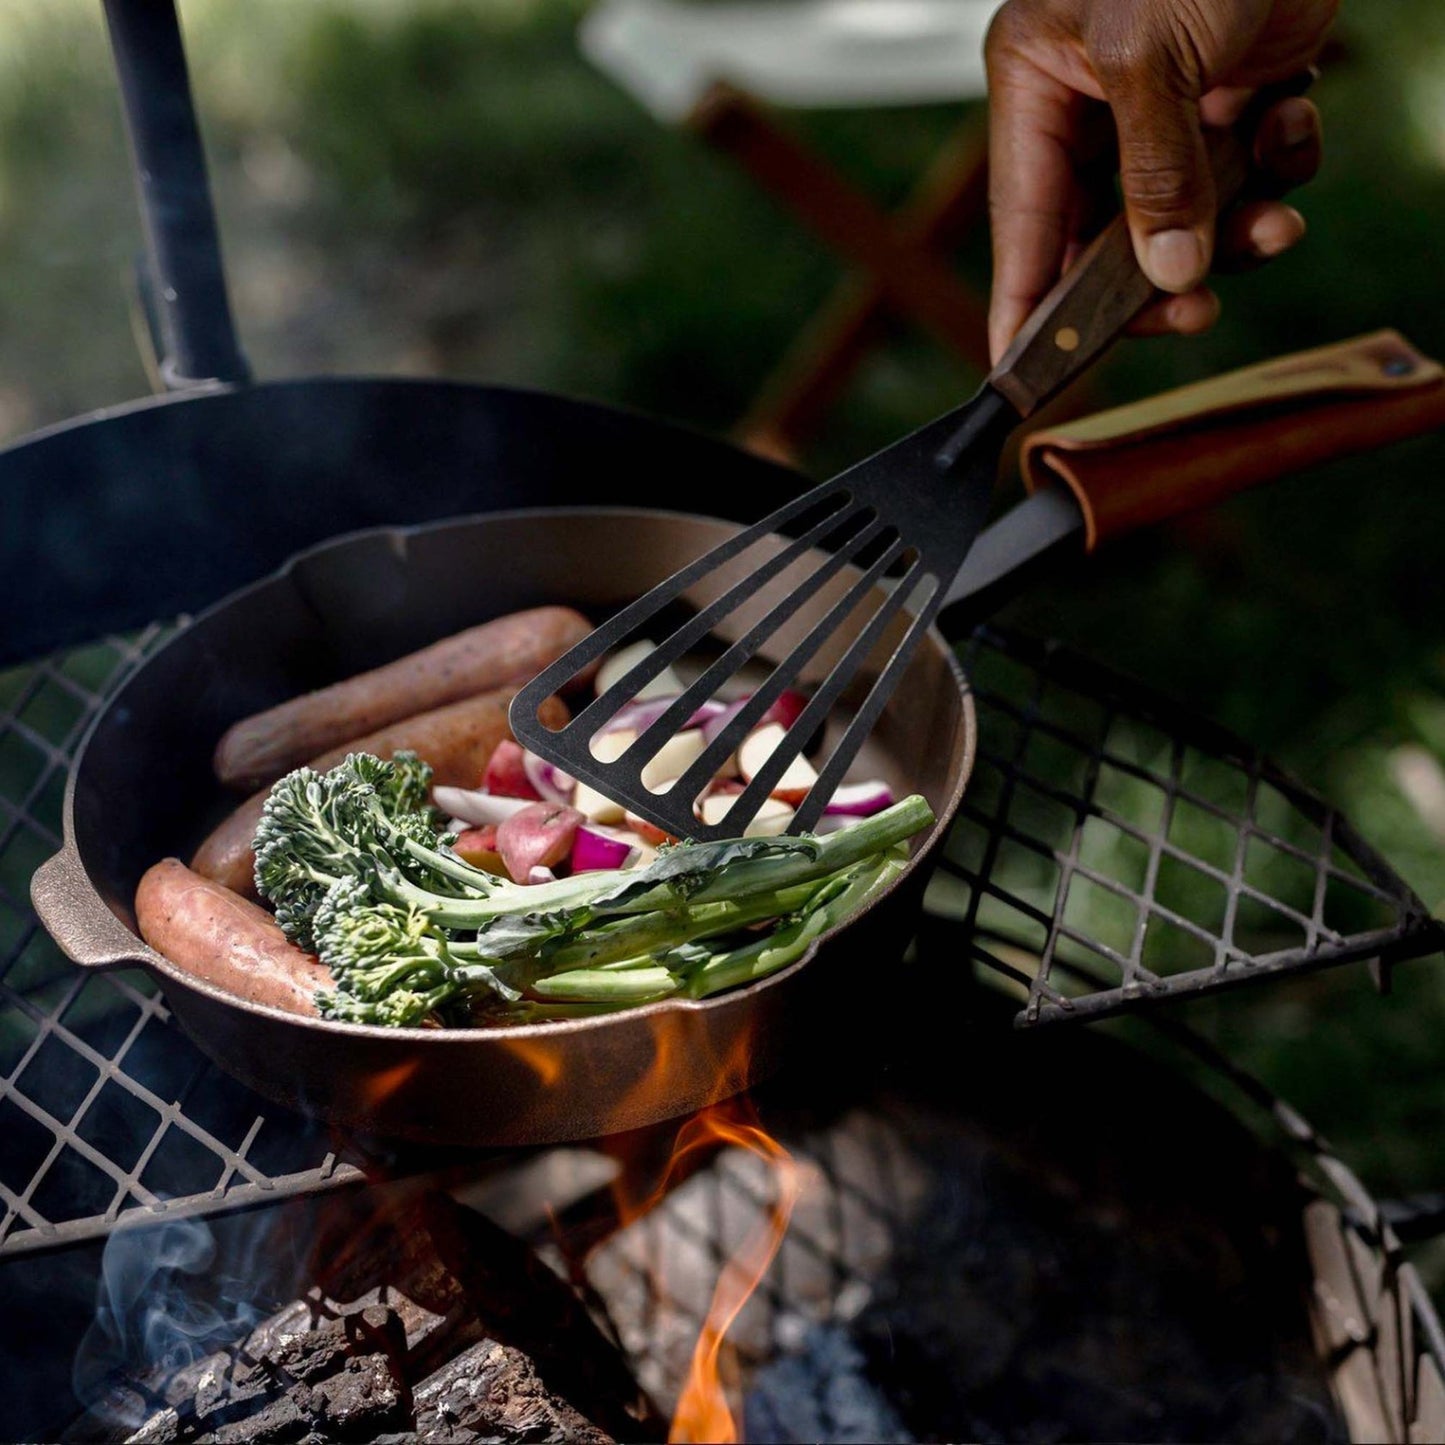 ALL-IN-ONE CAST IRON SKILLET